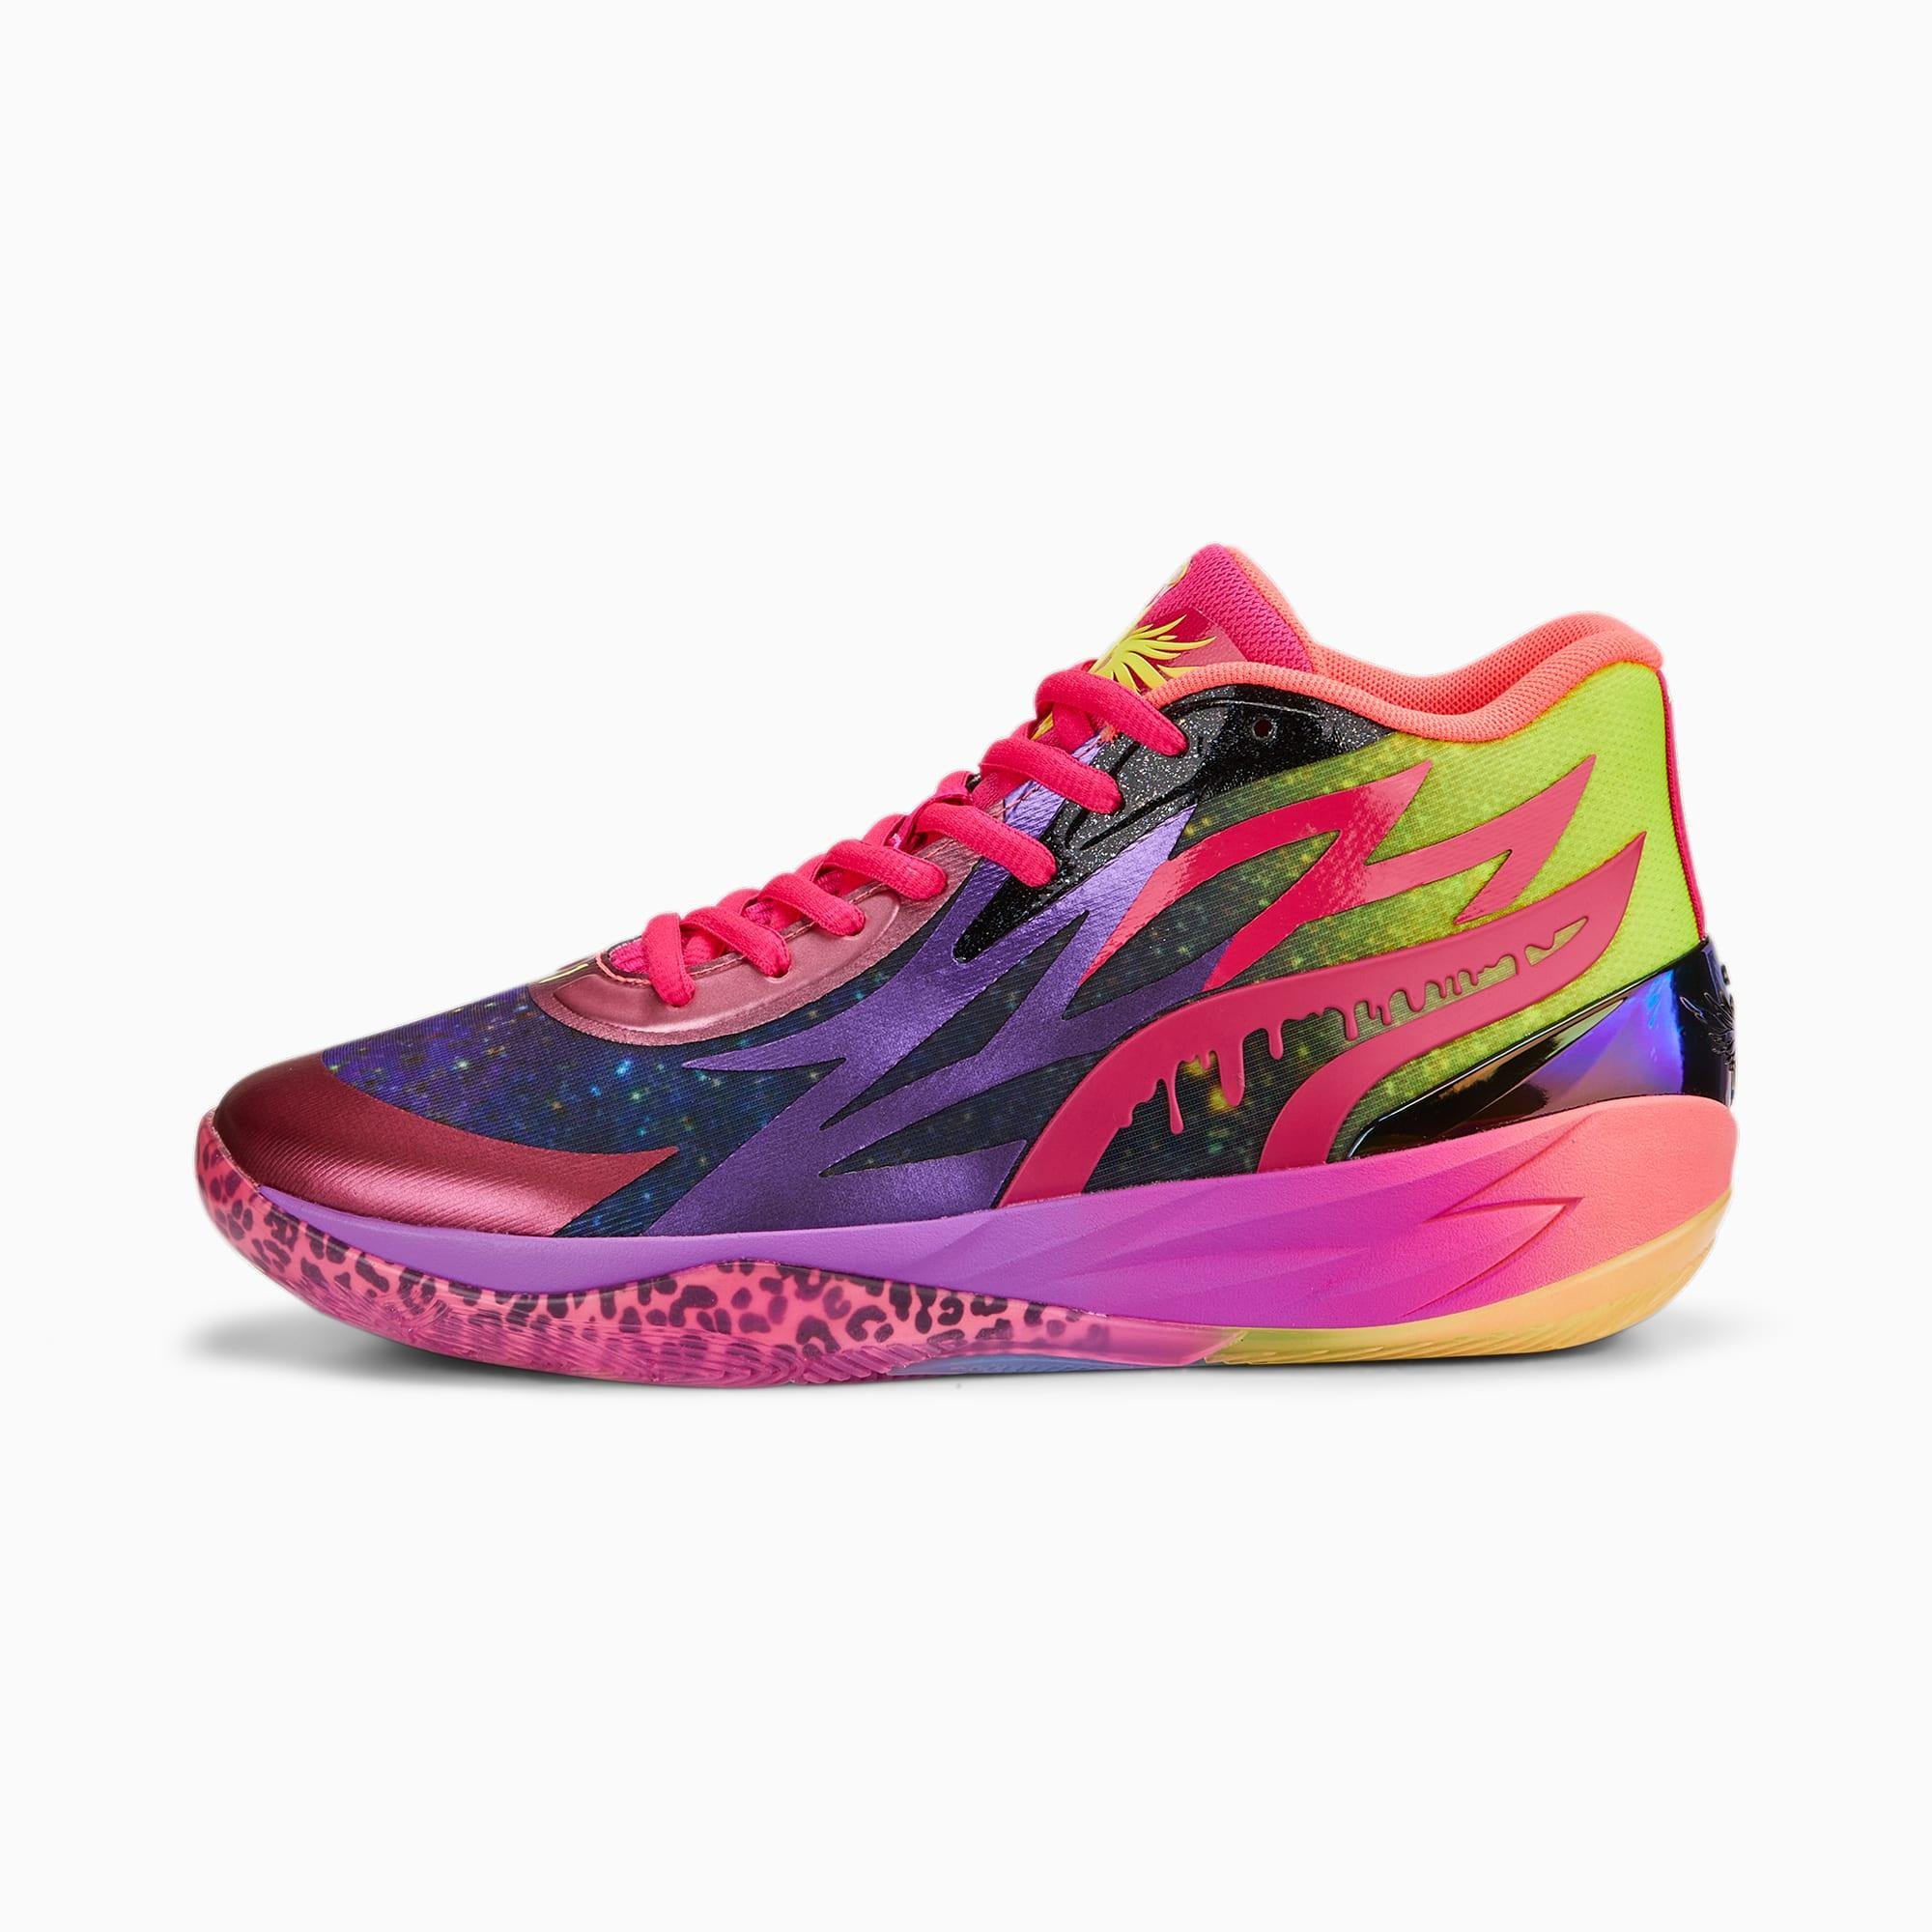 PUMA x LAMELO BALL MB.02 Be You Men's Basketball Shoes by PUMA